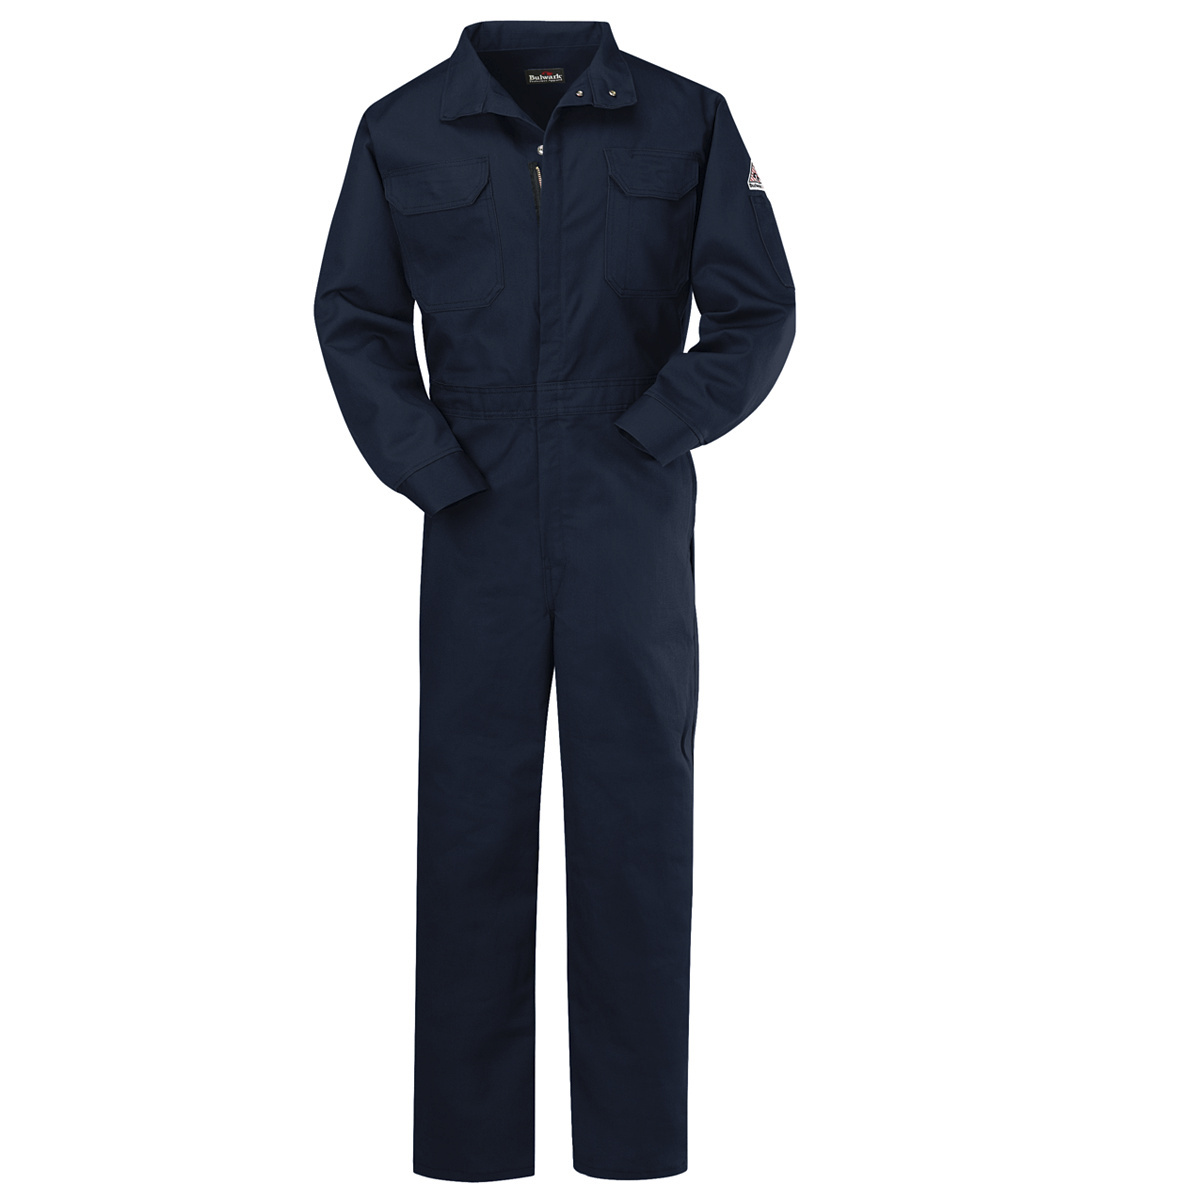 Bulwark® X-Large Regular Navy Blue Westex Ultrasoft® Twill/Cotton/Nylon Flame Resistant Coveralls With Zipper Front Closure